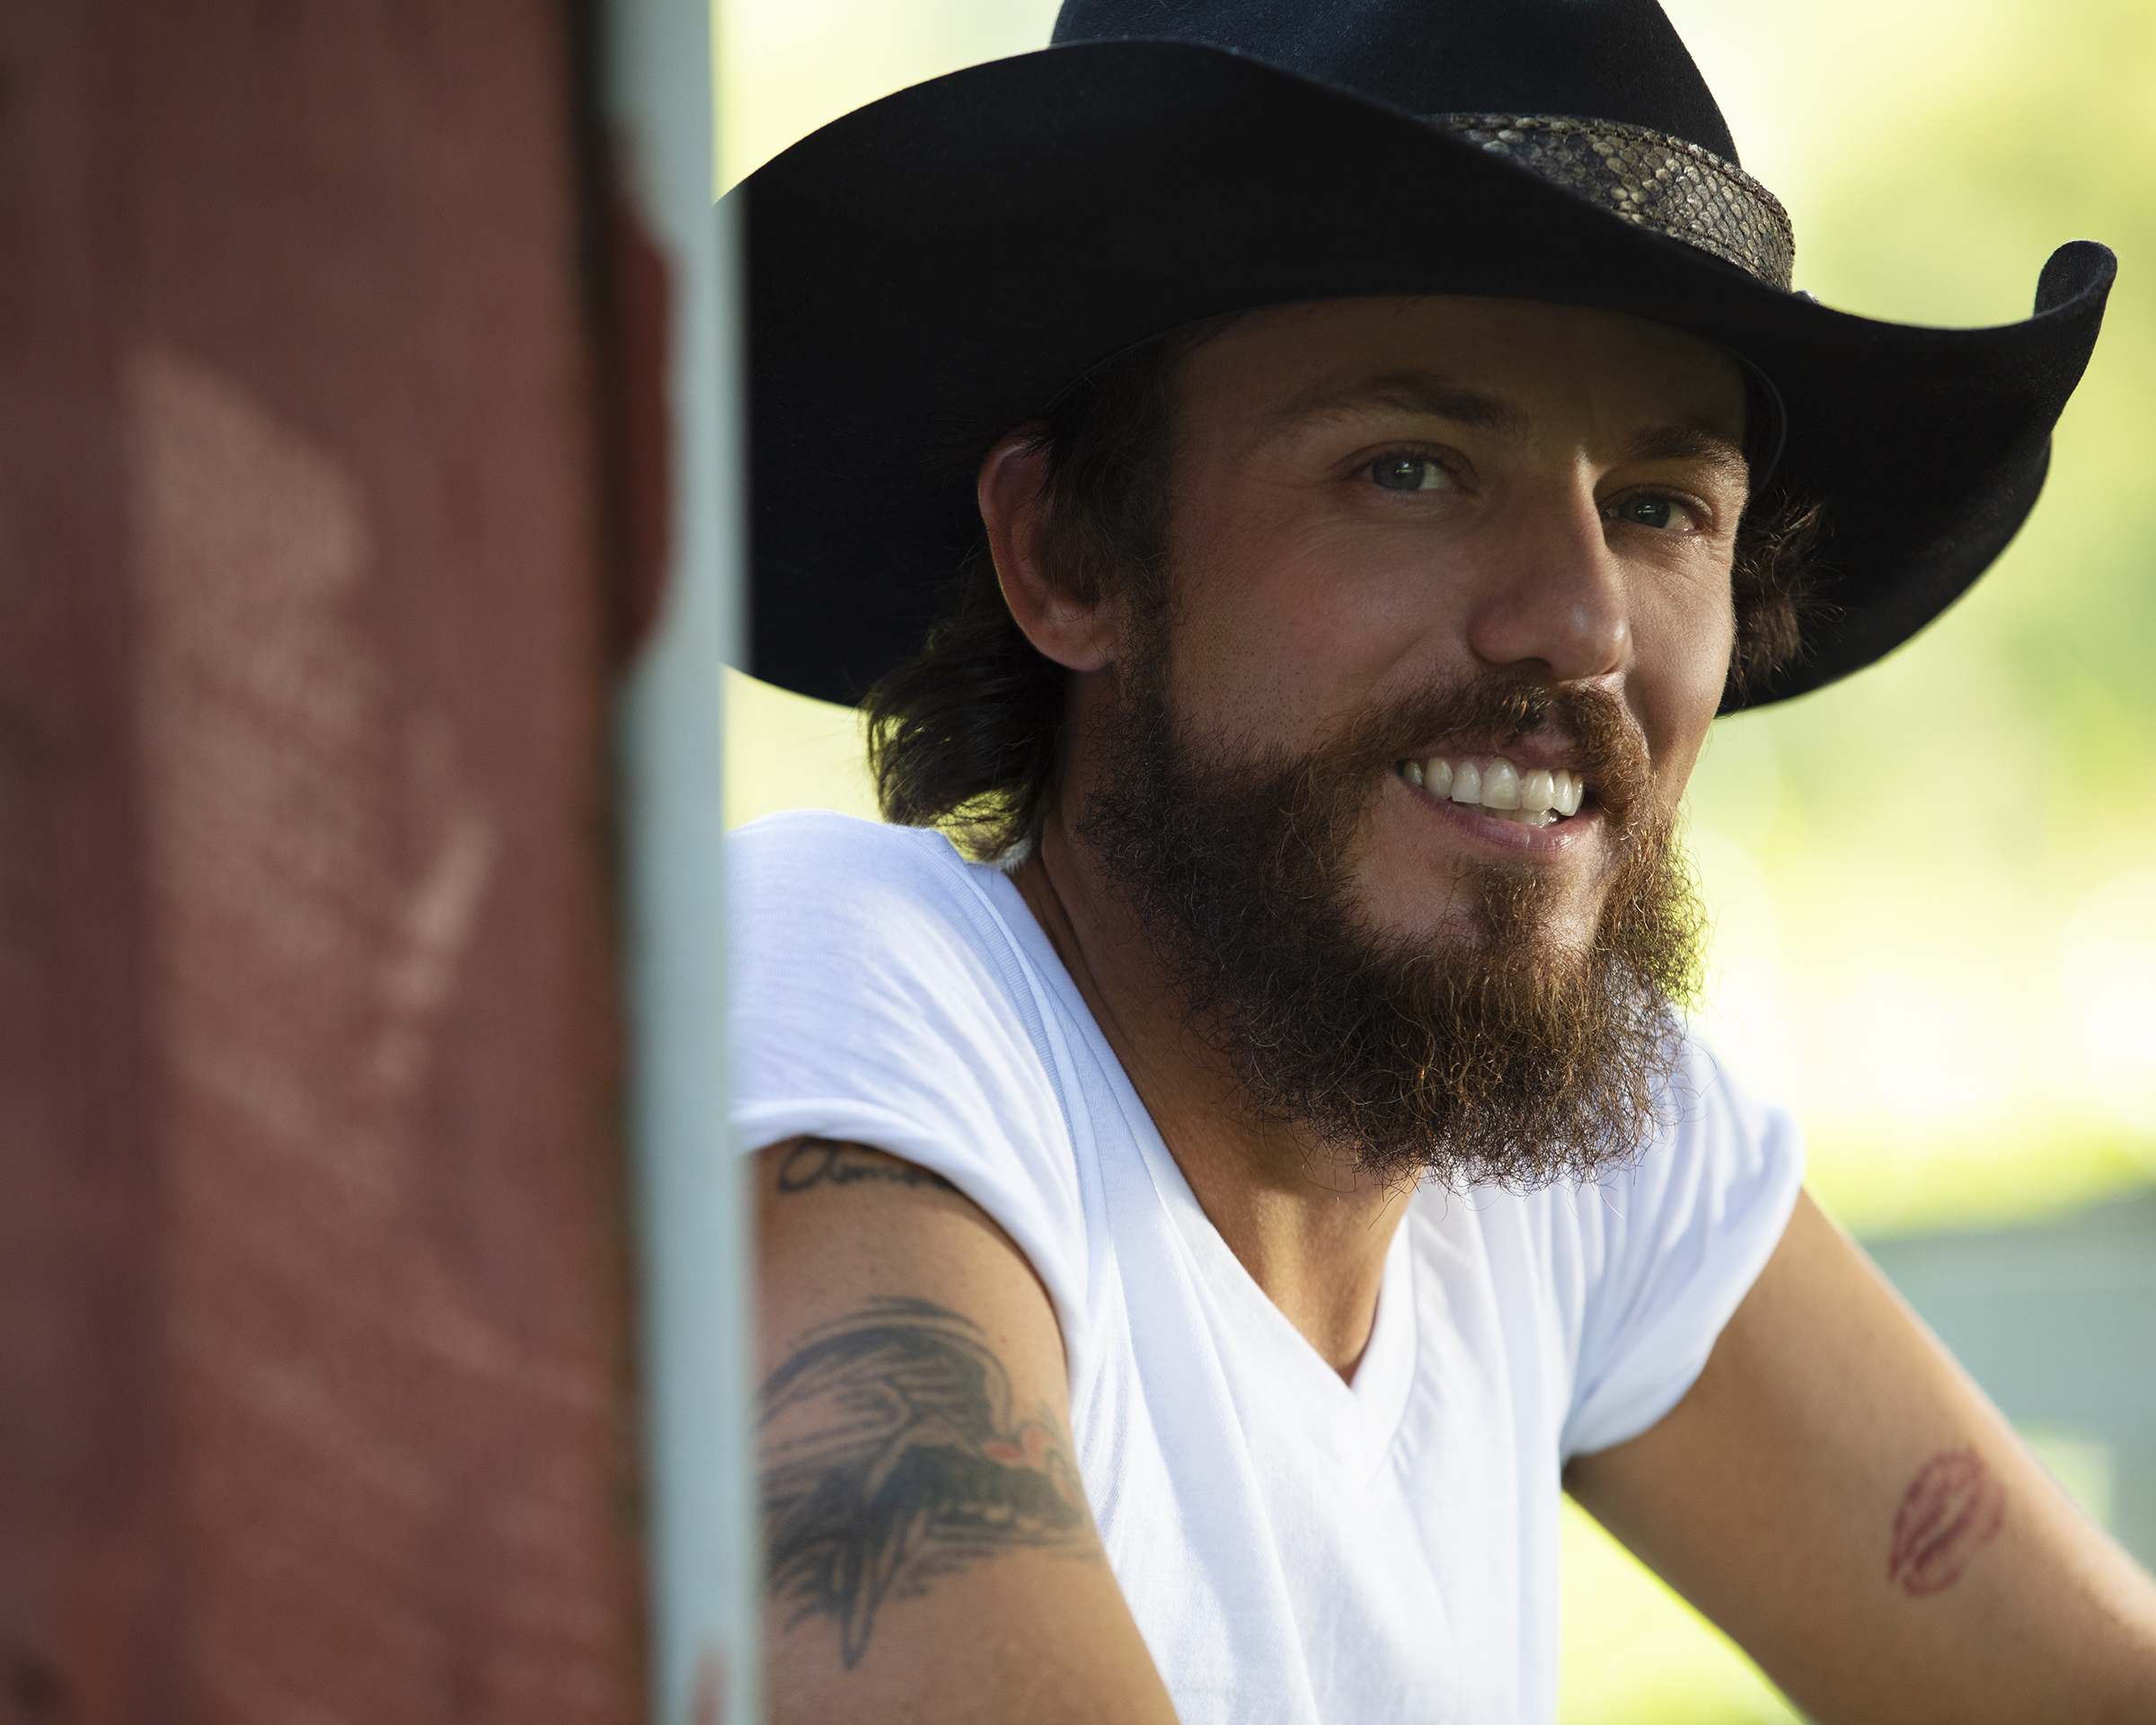 CHRIS JANSON BRINGS TOGETHER SPECIAL GUESTS, FAMOUS FRIENDS FOR "COLD BEER TRUTH" 